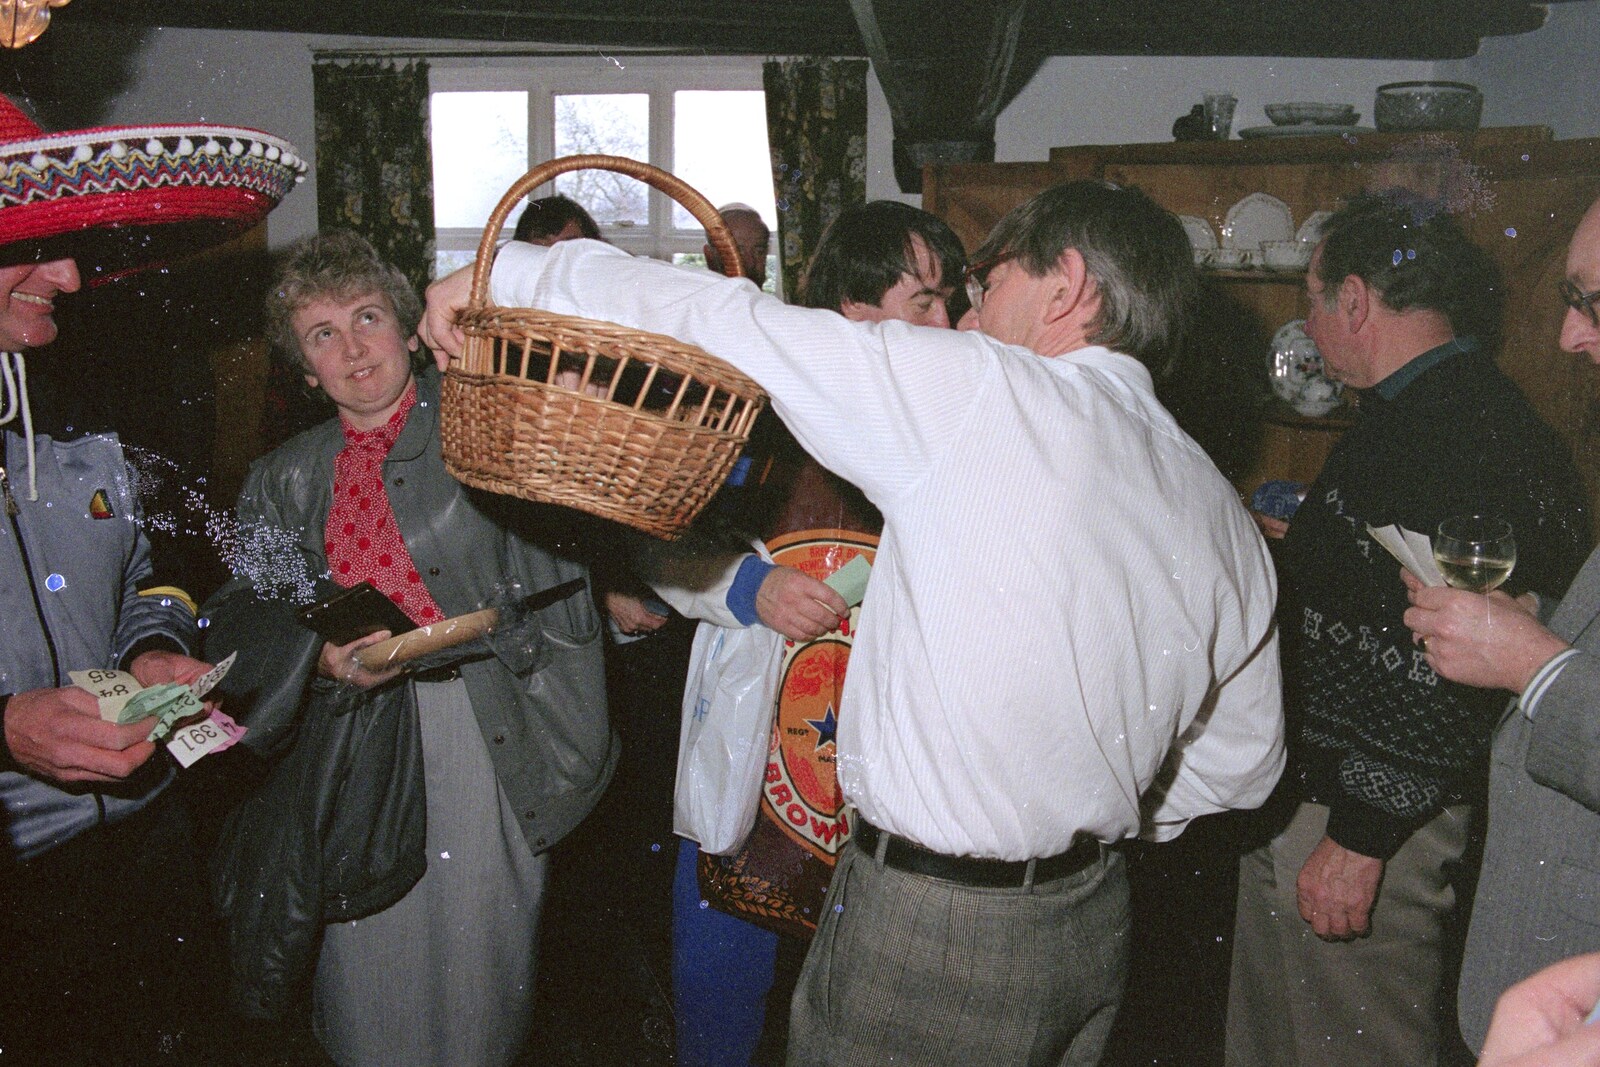 Linda picks a raffle ticket from Pancake Day in Starston, Norfolk - 27th February 1990